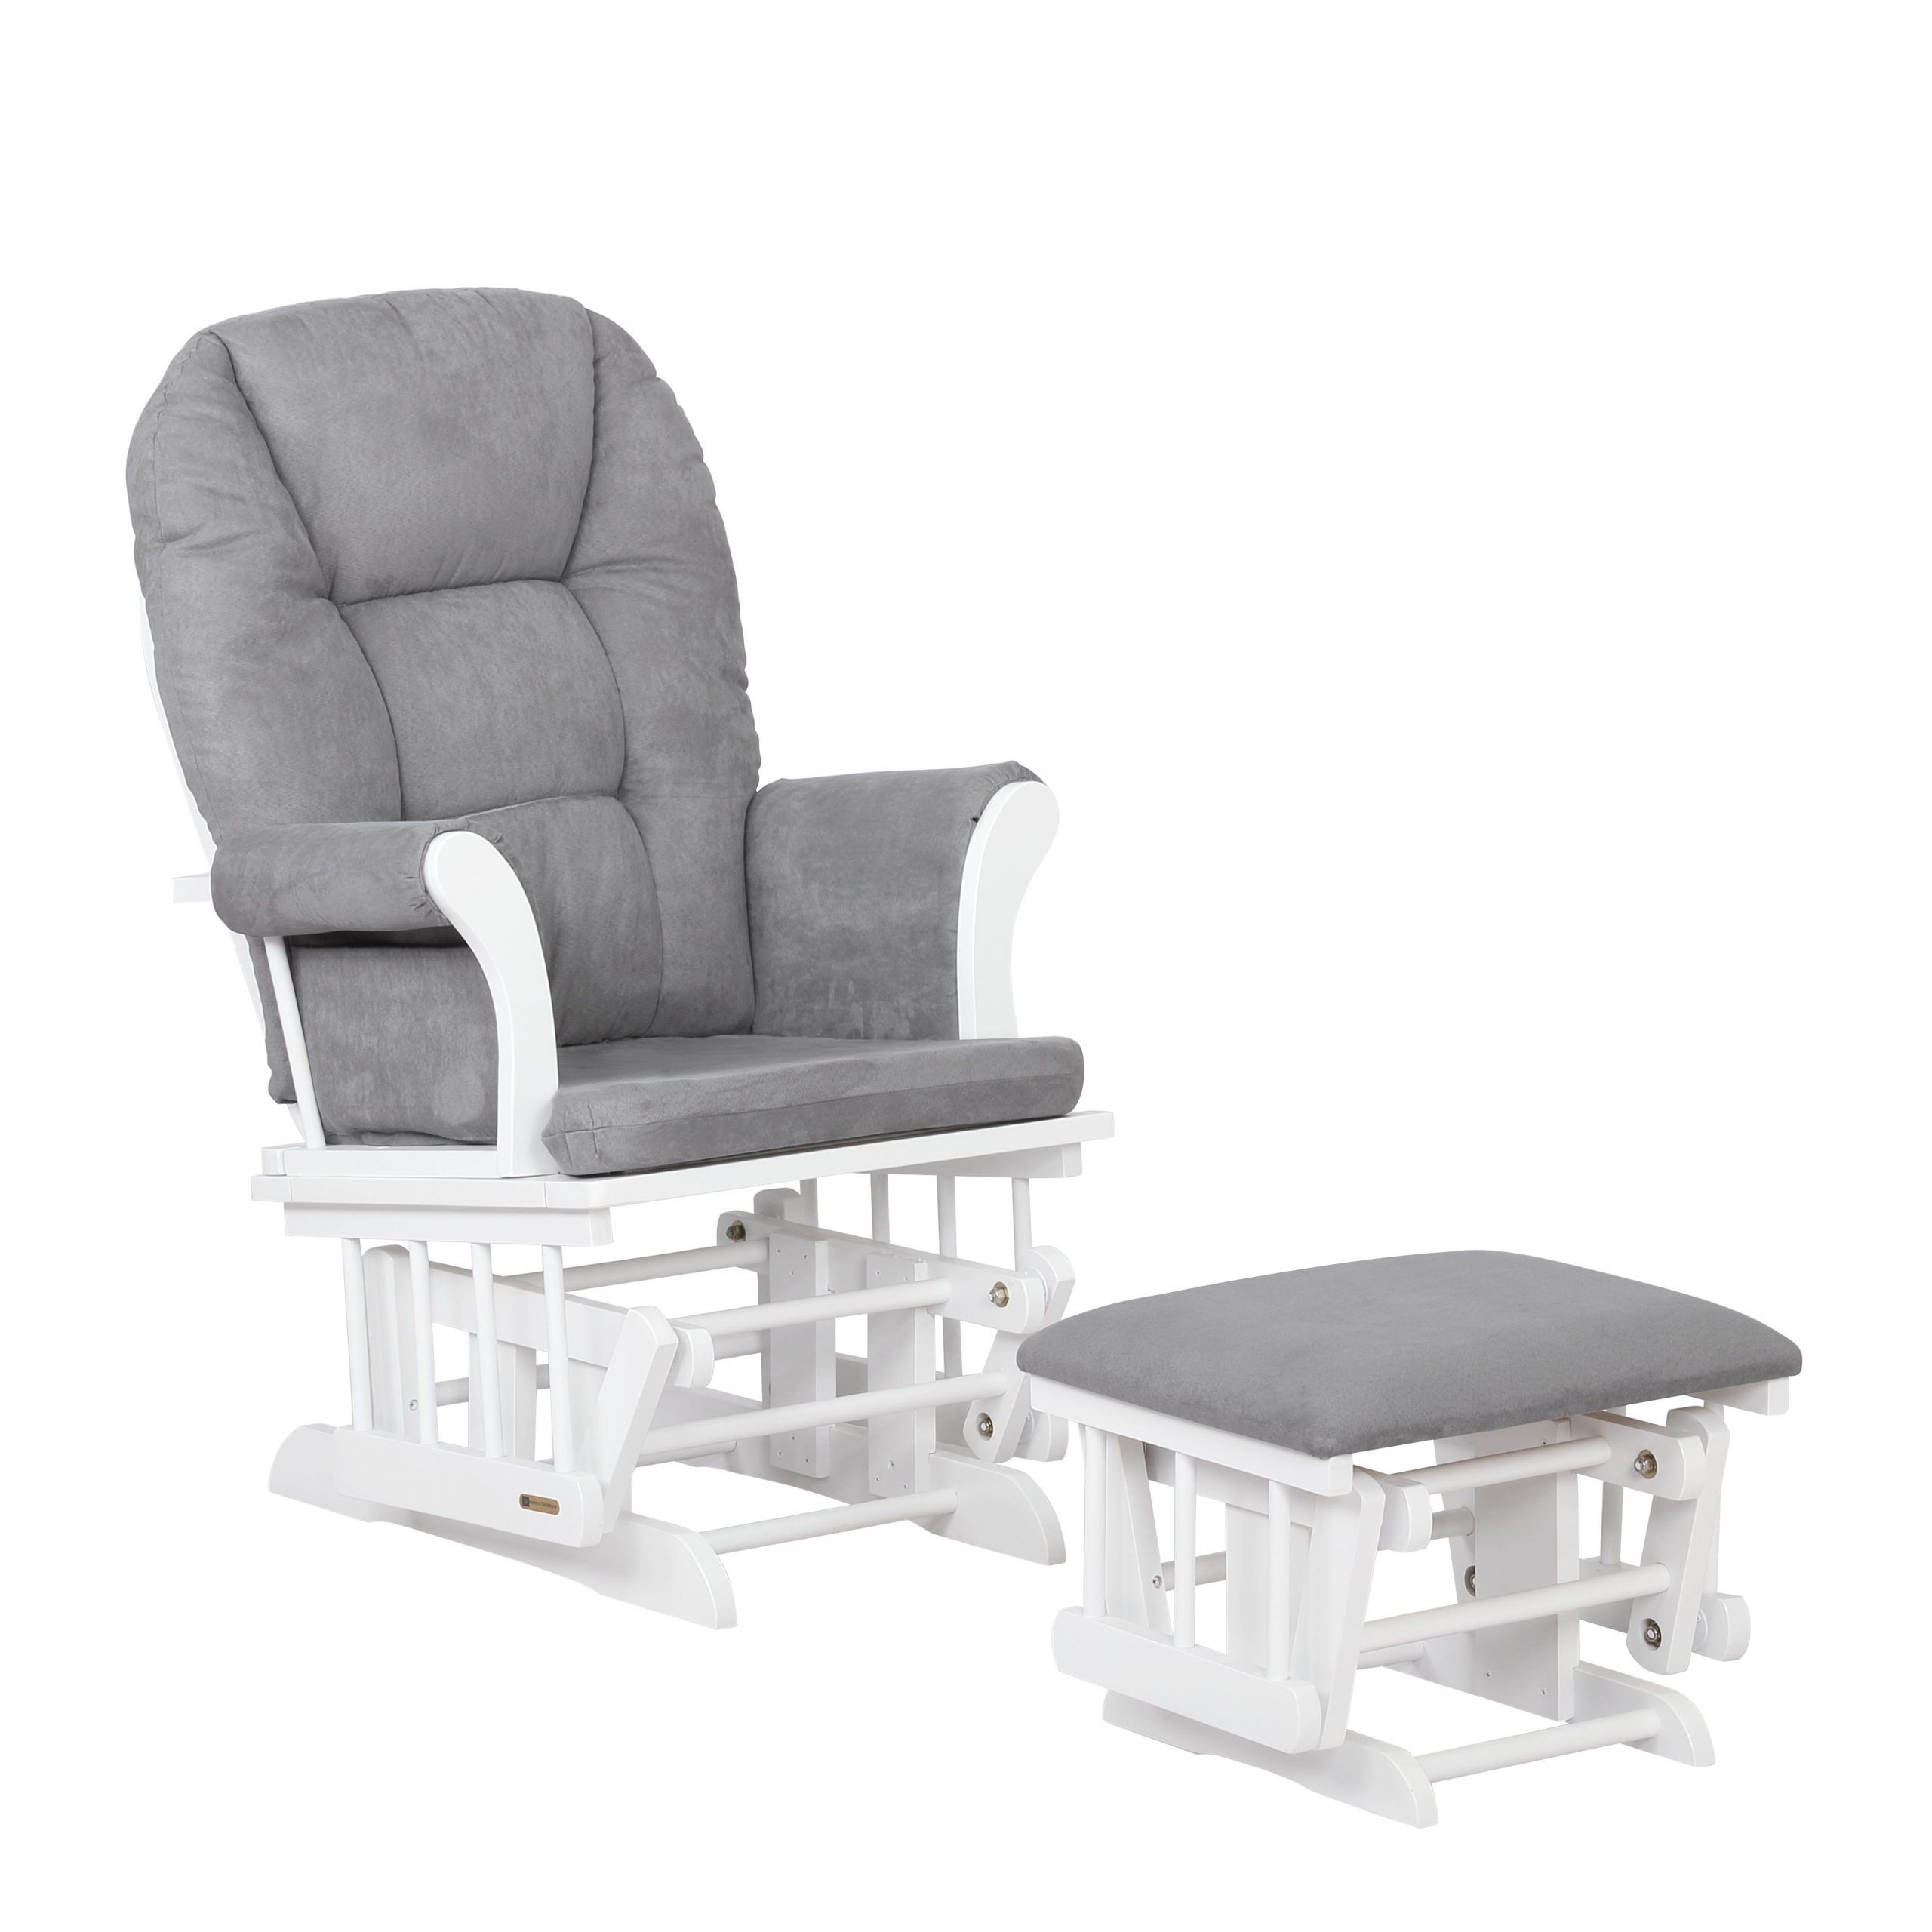 Glider Chair And Ottoman Combo – White/light Grey – 7083cb. (View 19 of 20)